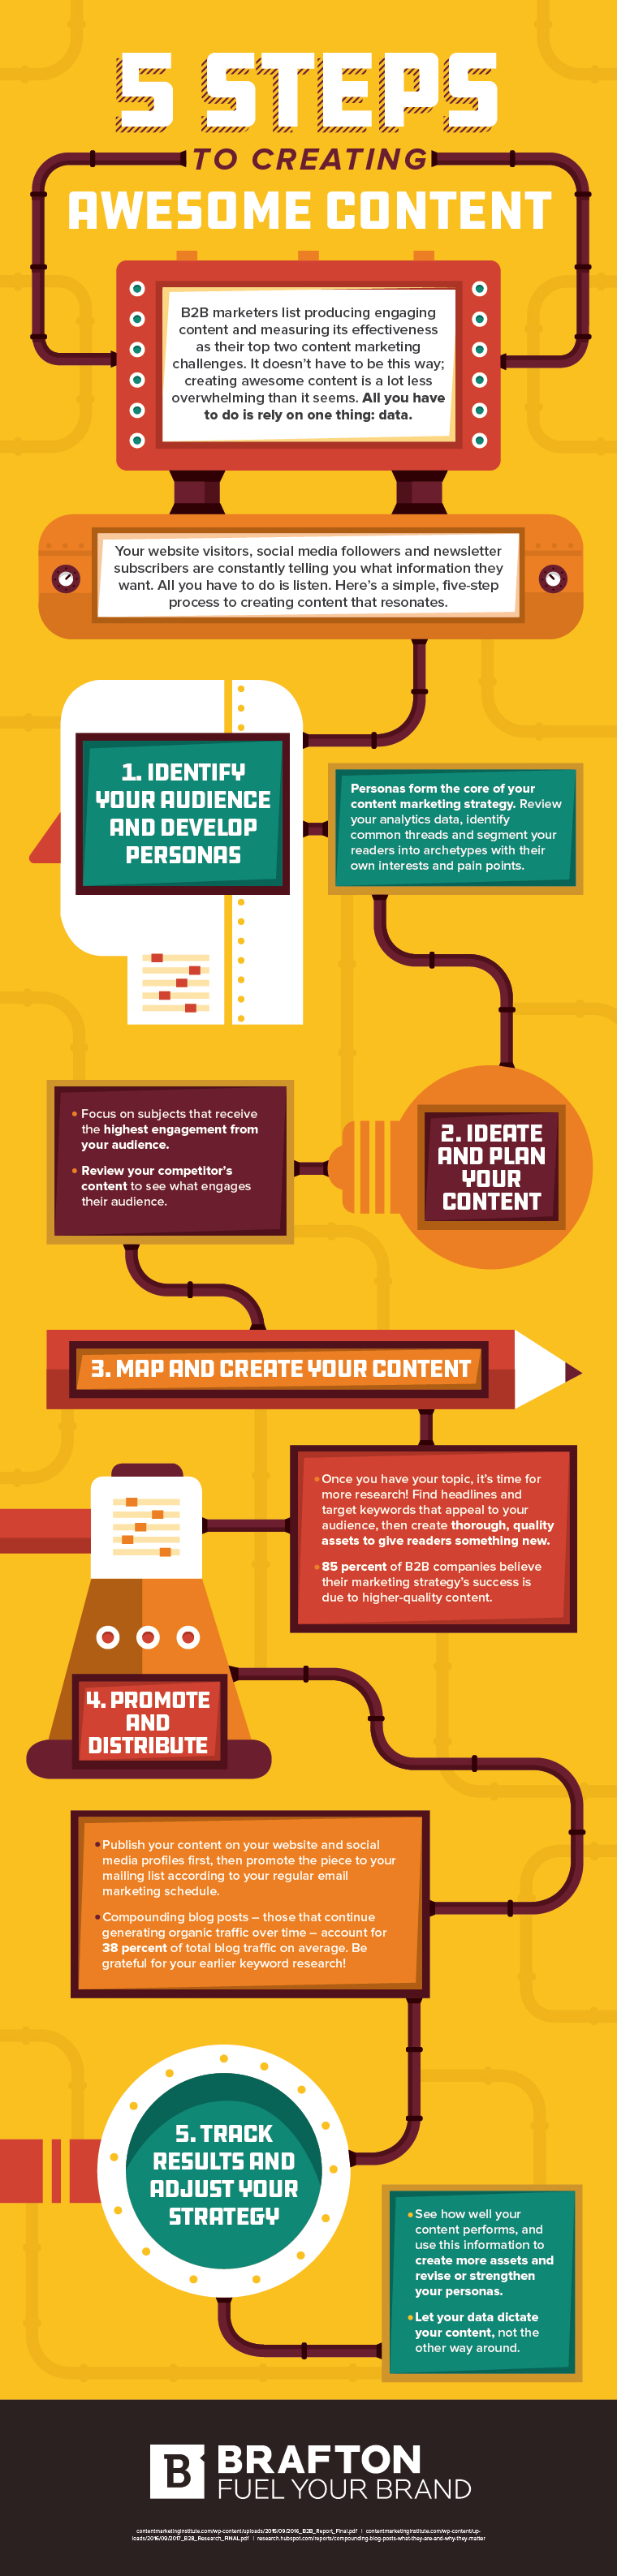 Steps to create awesome content